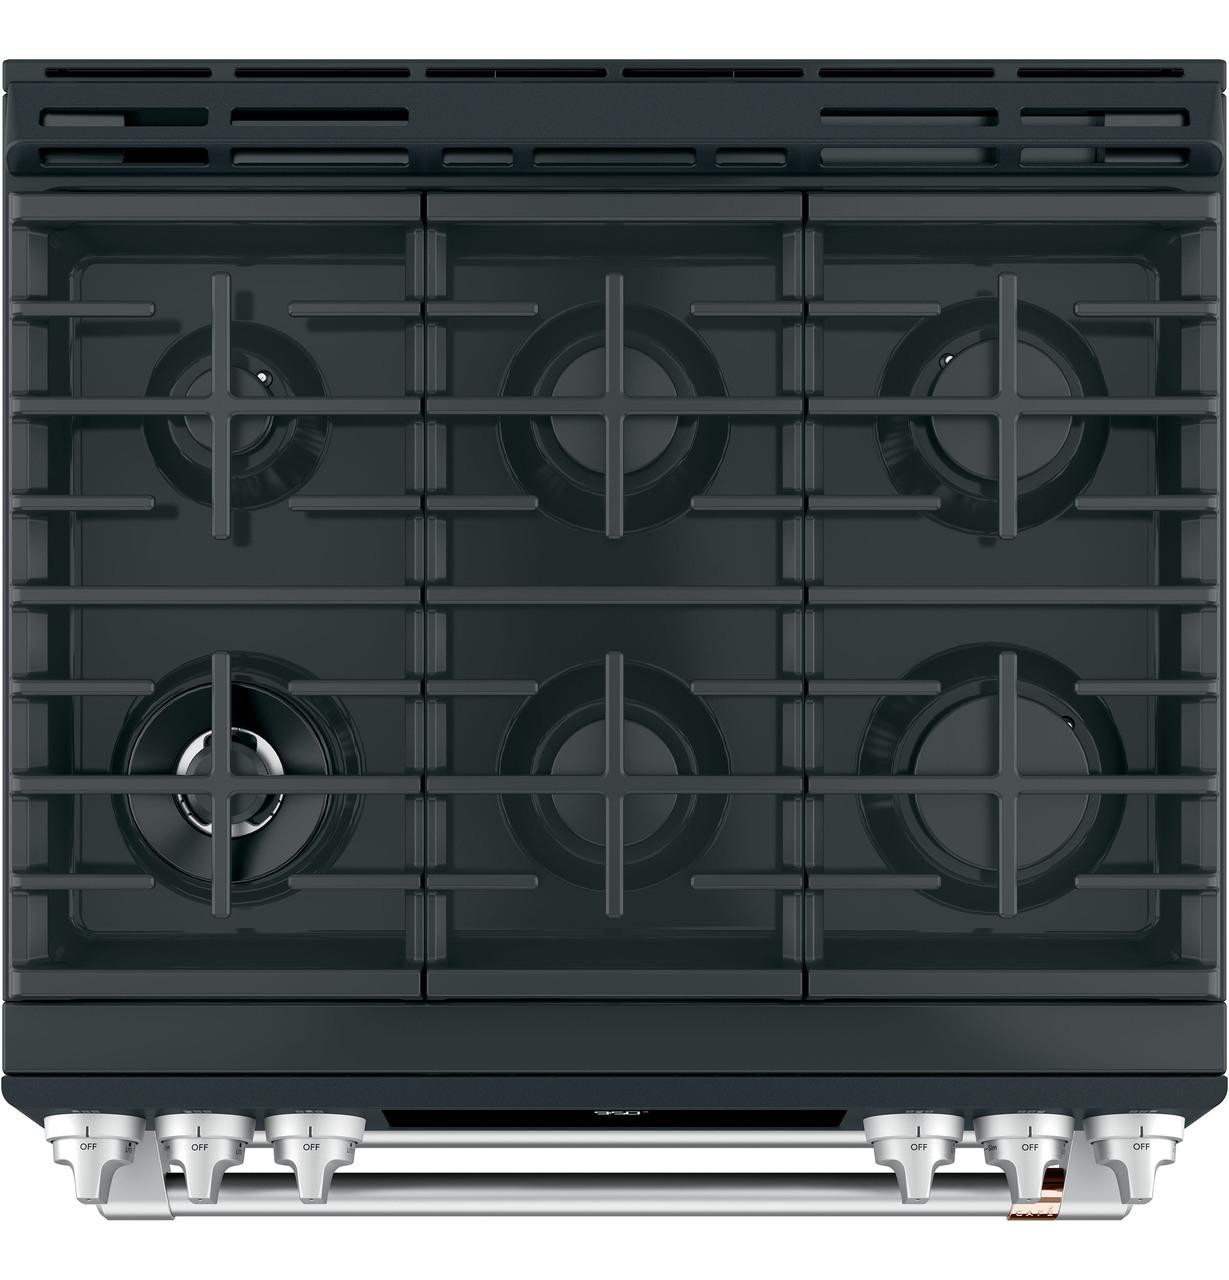 Caf(eback)™ 30" Smart Slide-In, Front-Control, Dual-Fuel, Double-Oven Range with Convection